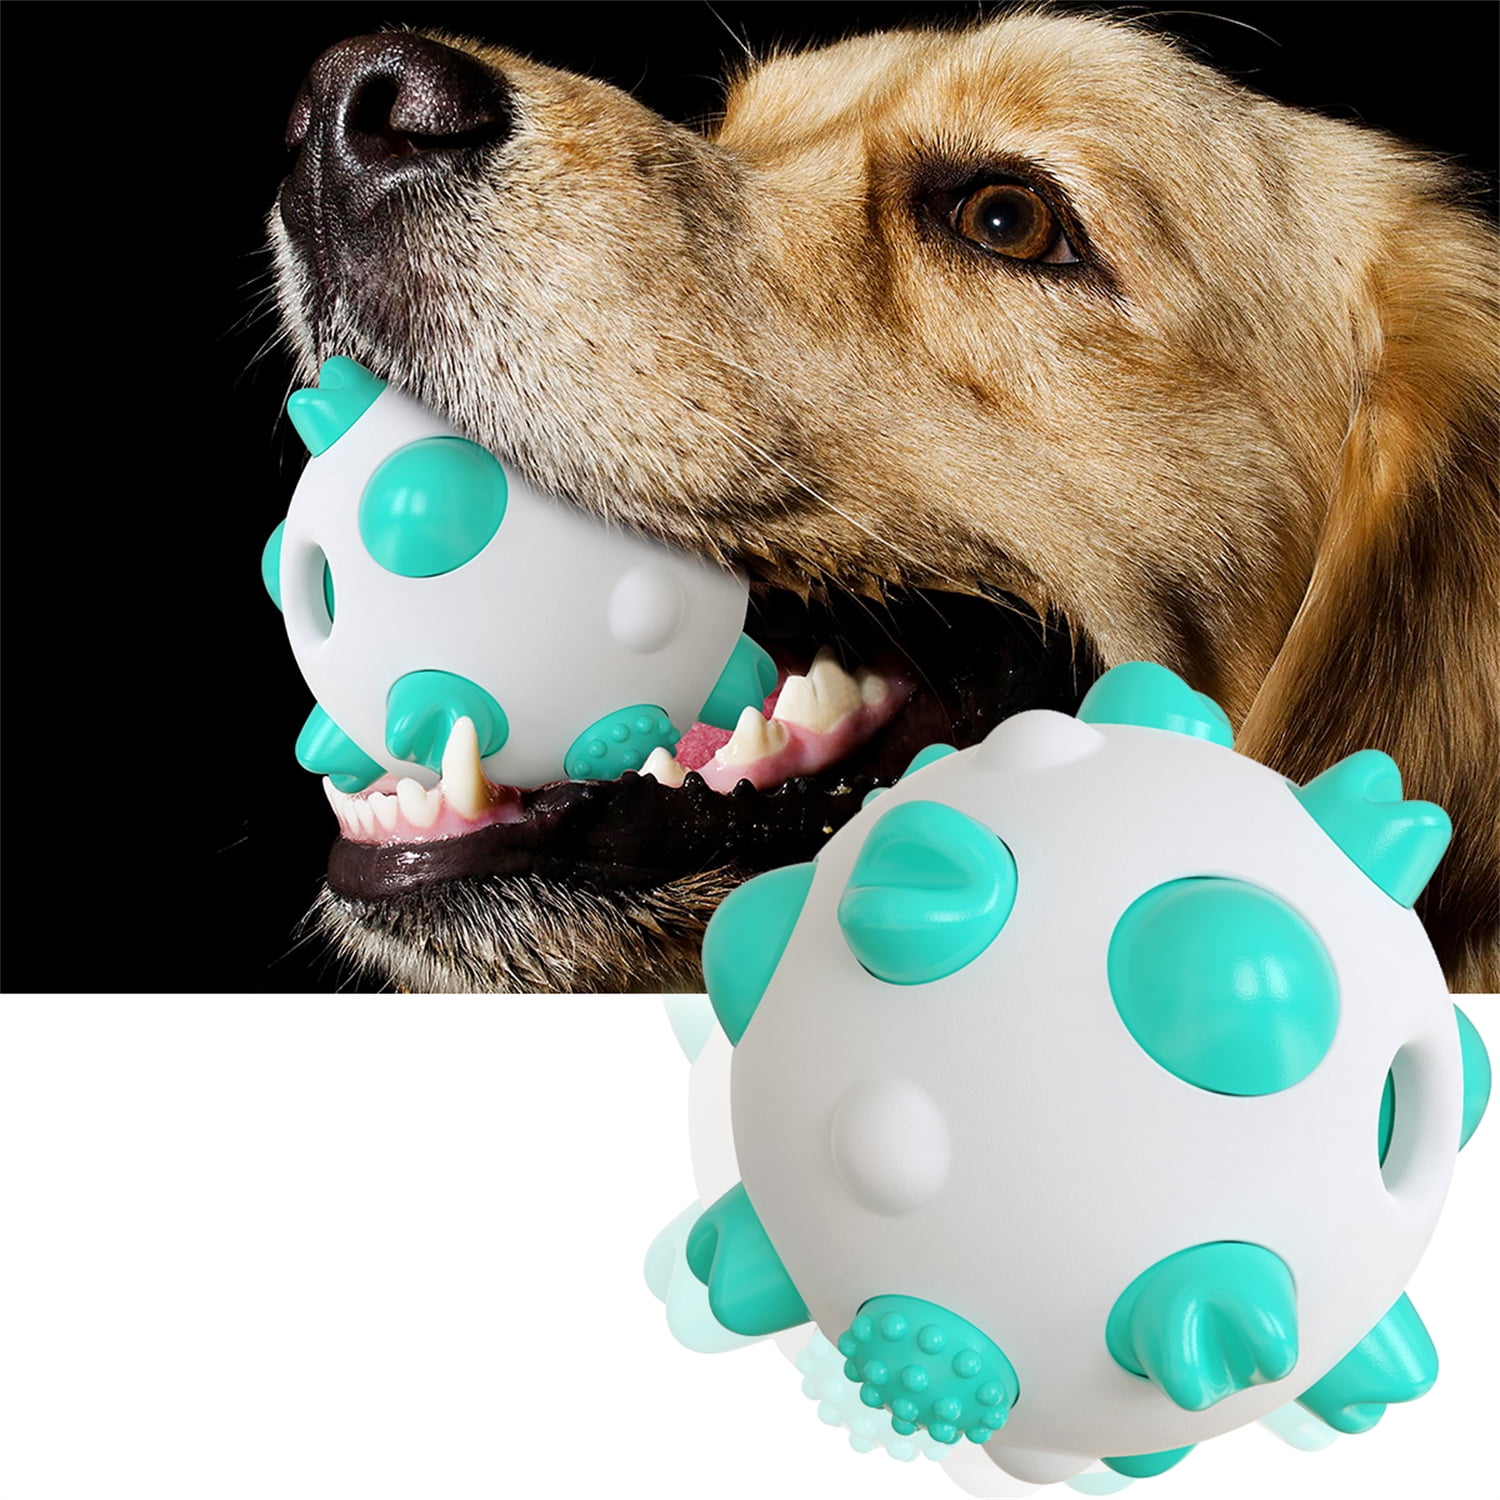 Petbobi Interactive Dog Toys Ball Self Moving Rolling Balls Plush Dog Toys  for Small and Medium Dogs, Mohican Bobby 